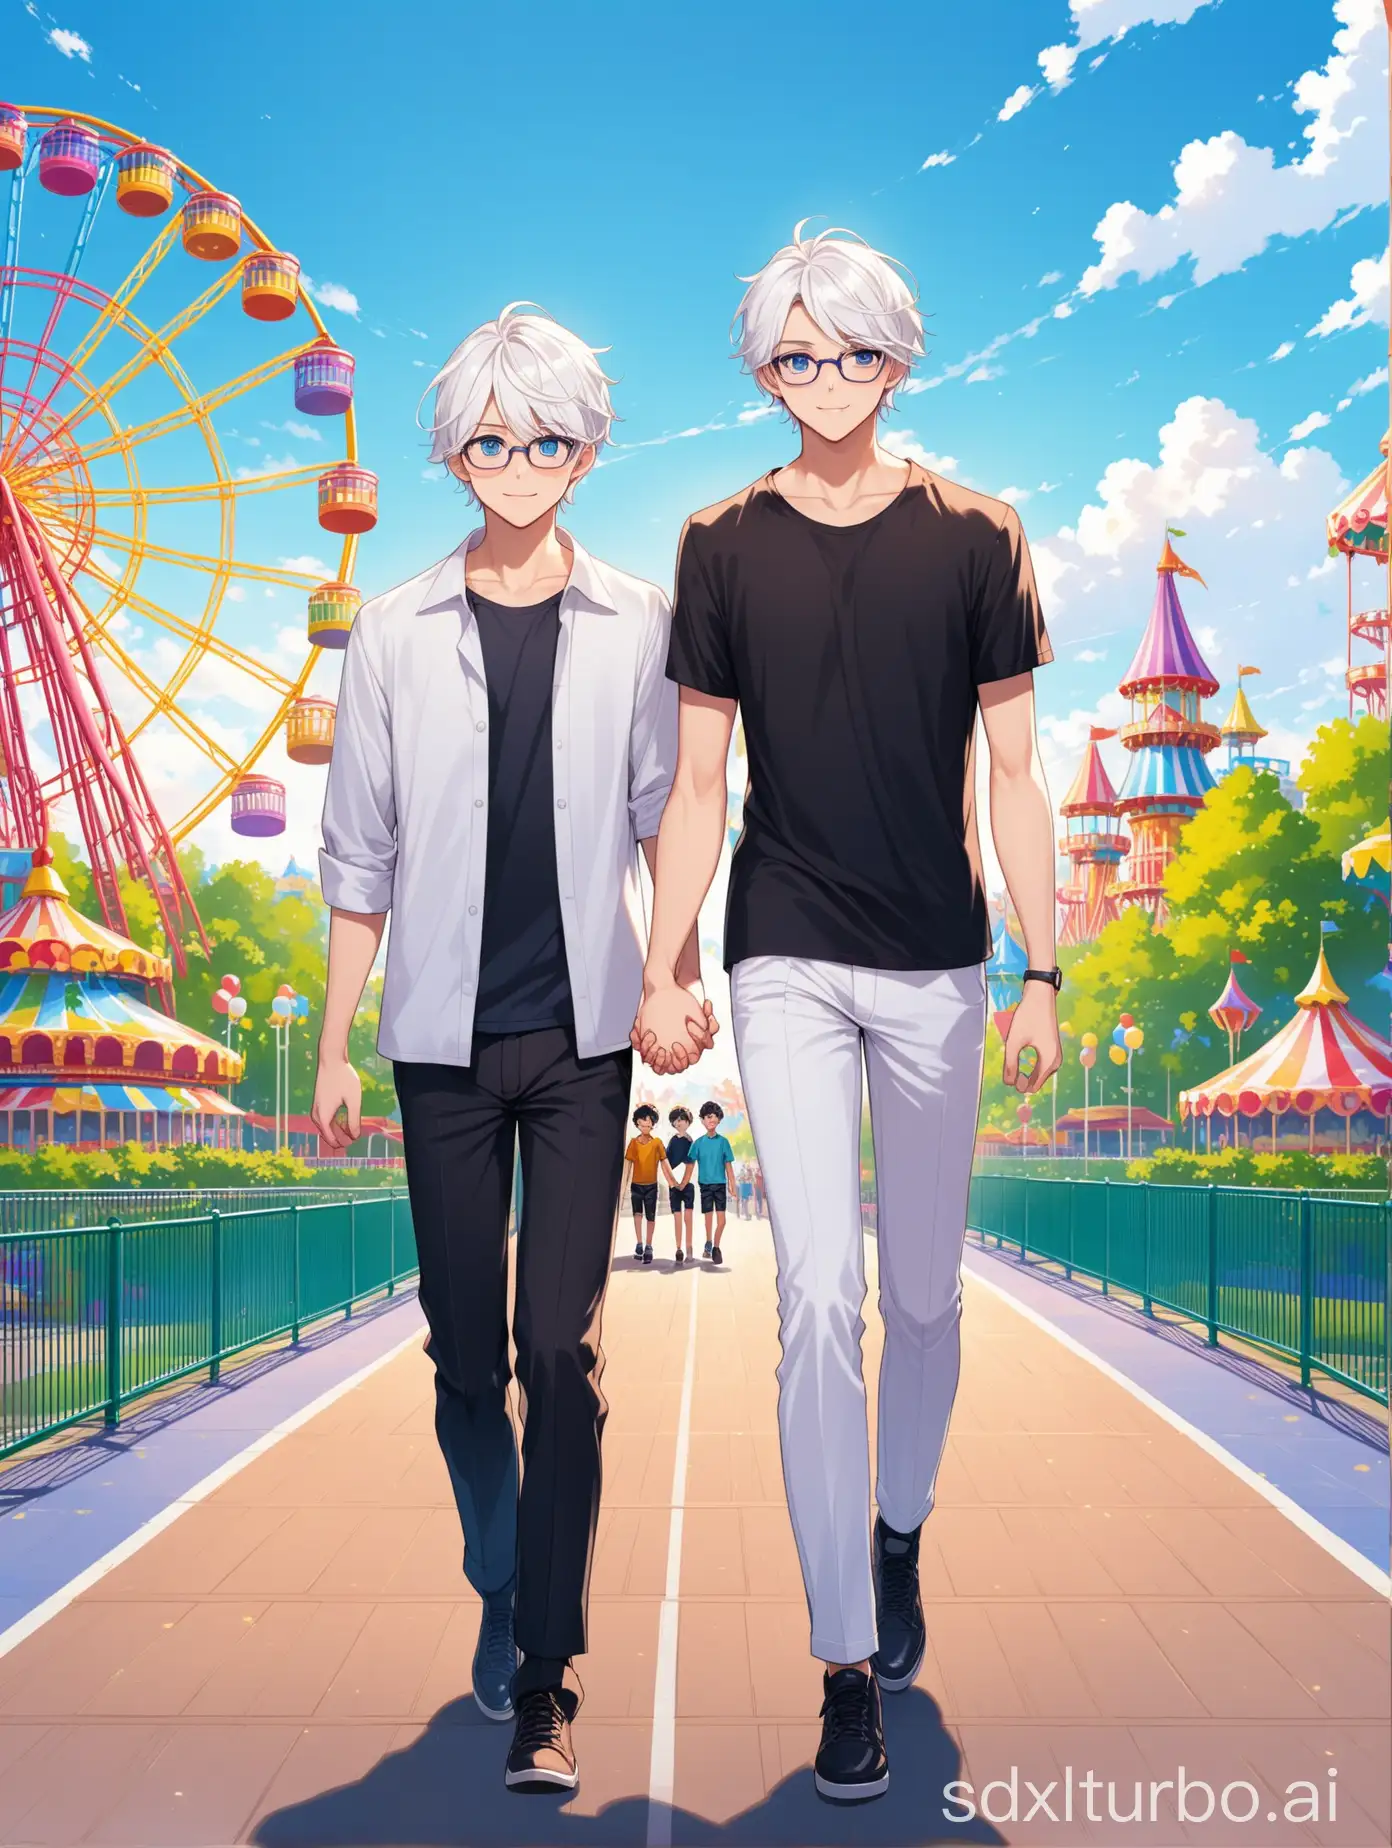 a young man with white hair and blue eyes who is 180cm tall and well built holding hands of a young man with big black eyes and purple eyes with glasses with height 175cm are walking with amusement park in background